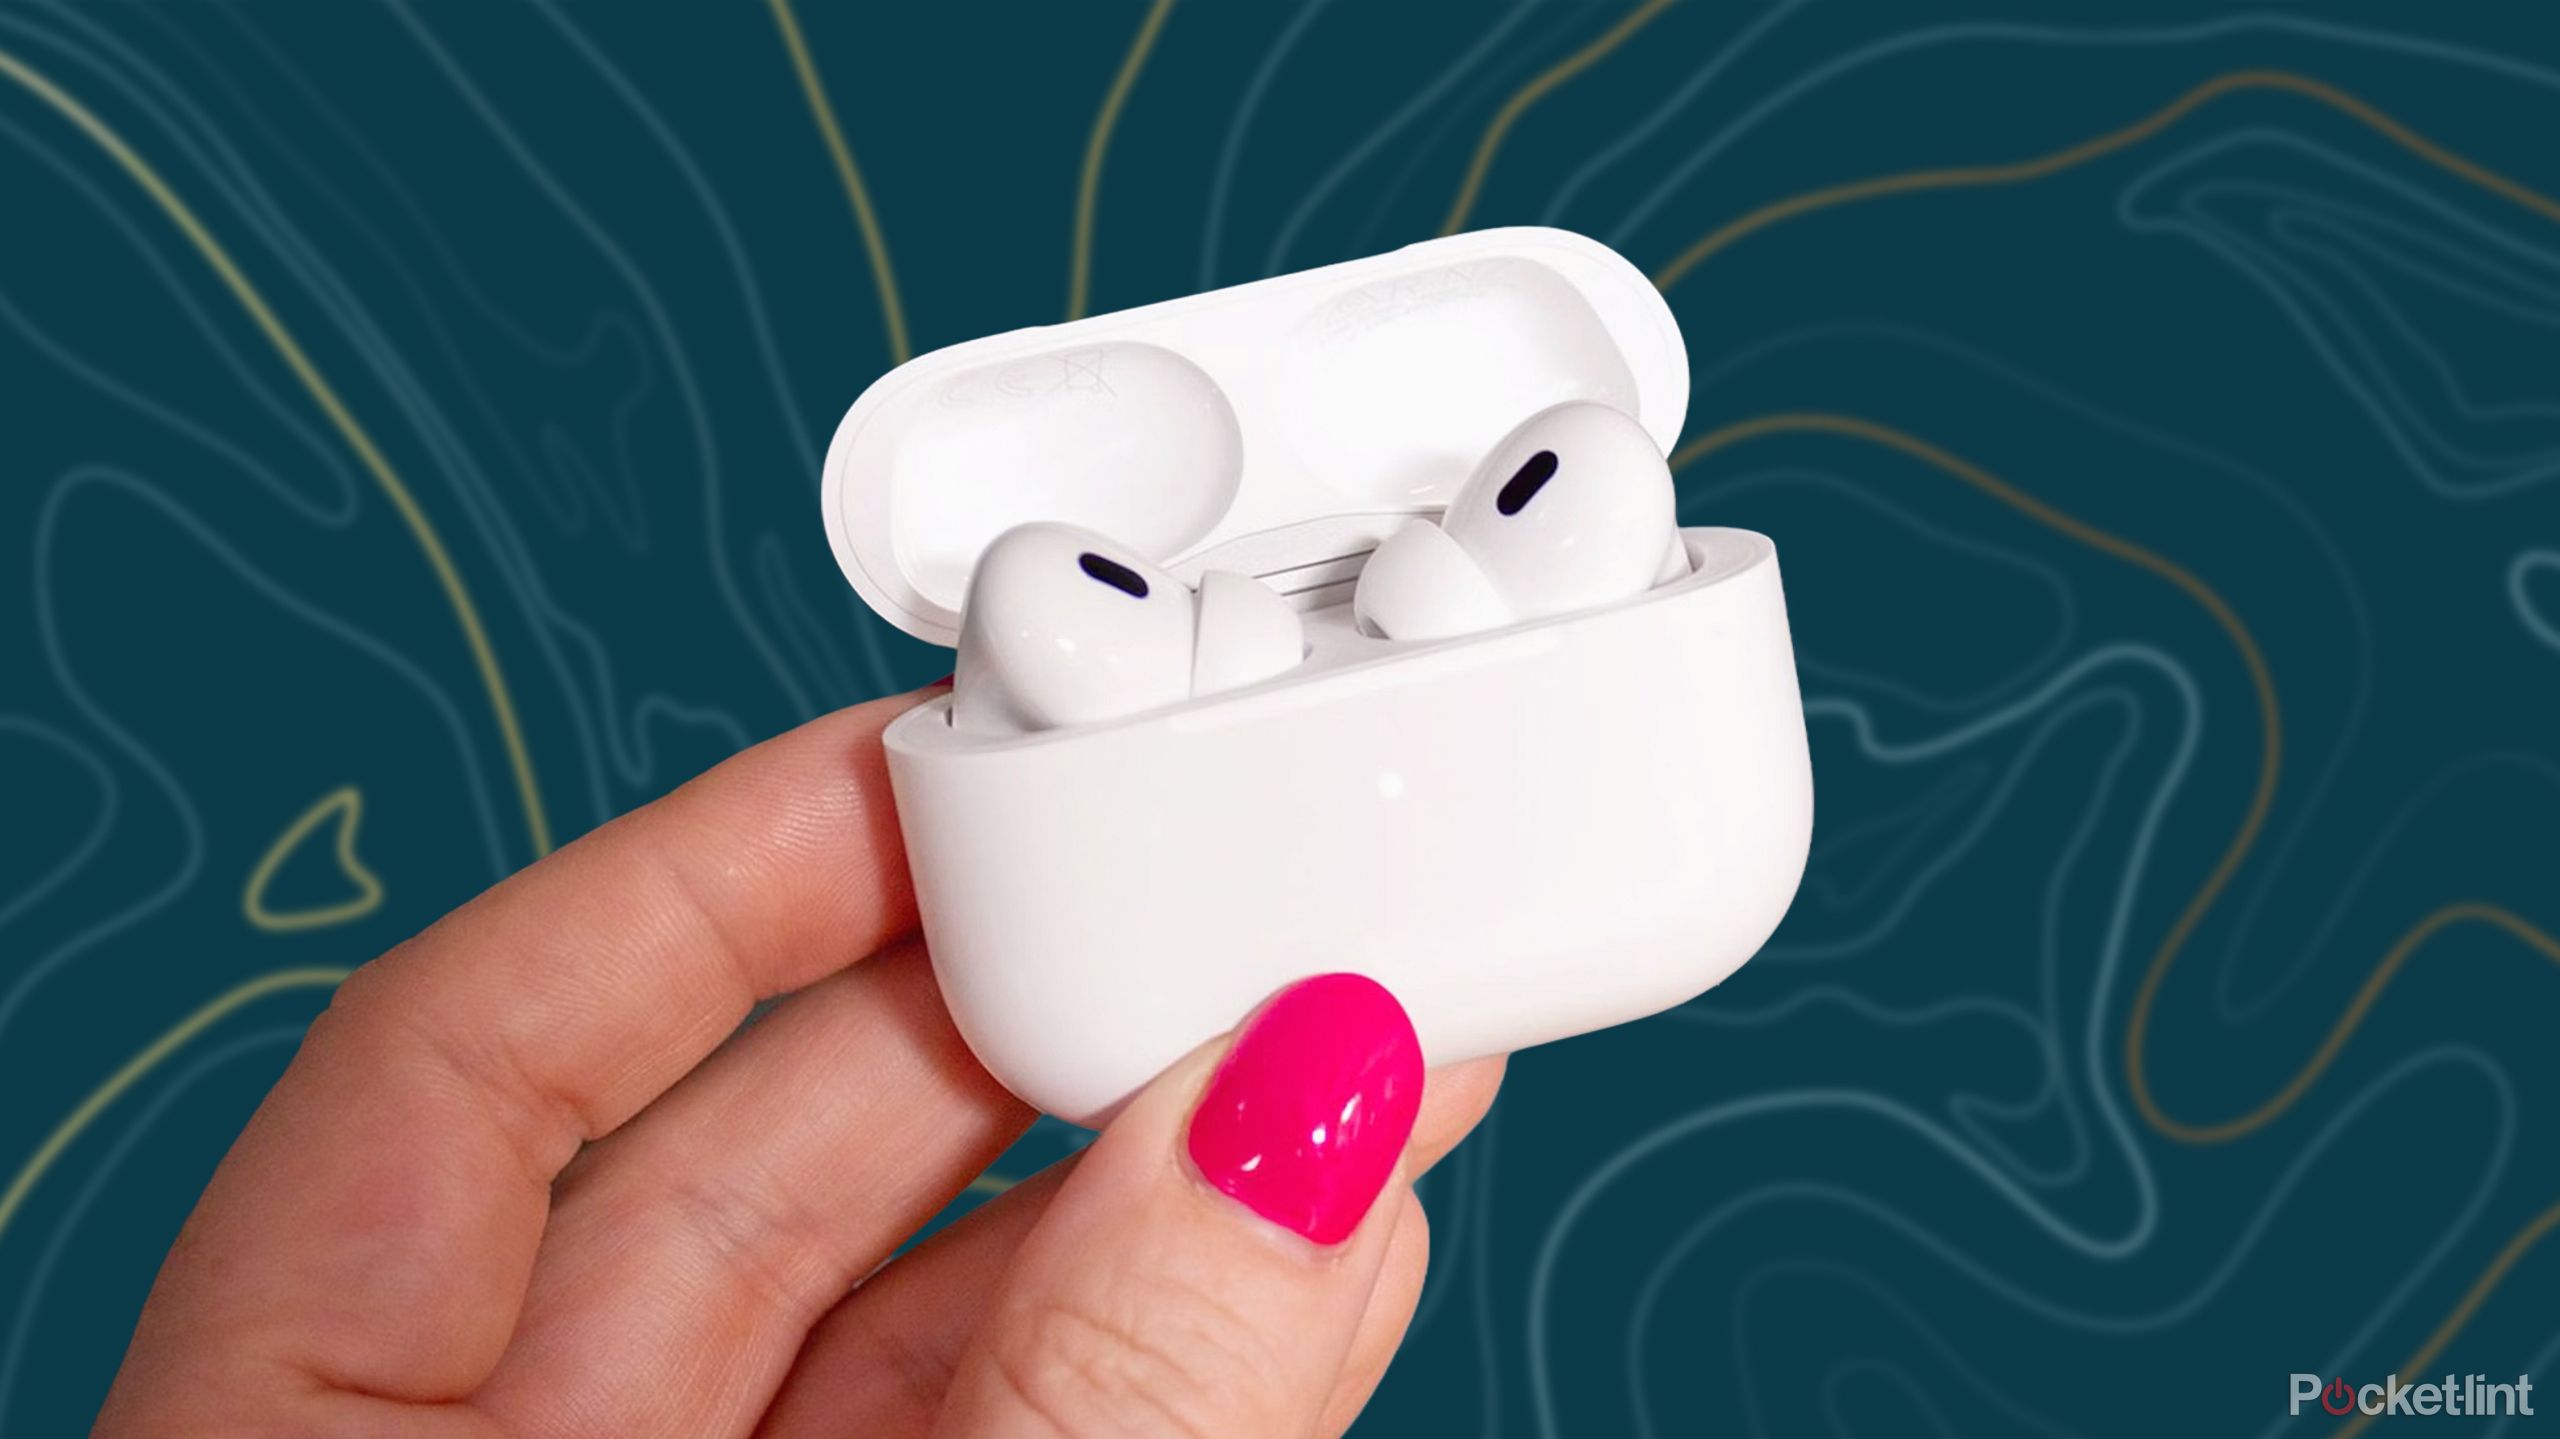 A hand holds the Apple AirPods Pro Gen 2 in front of a teal background with wavy blue and yellow lines. 